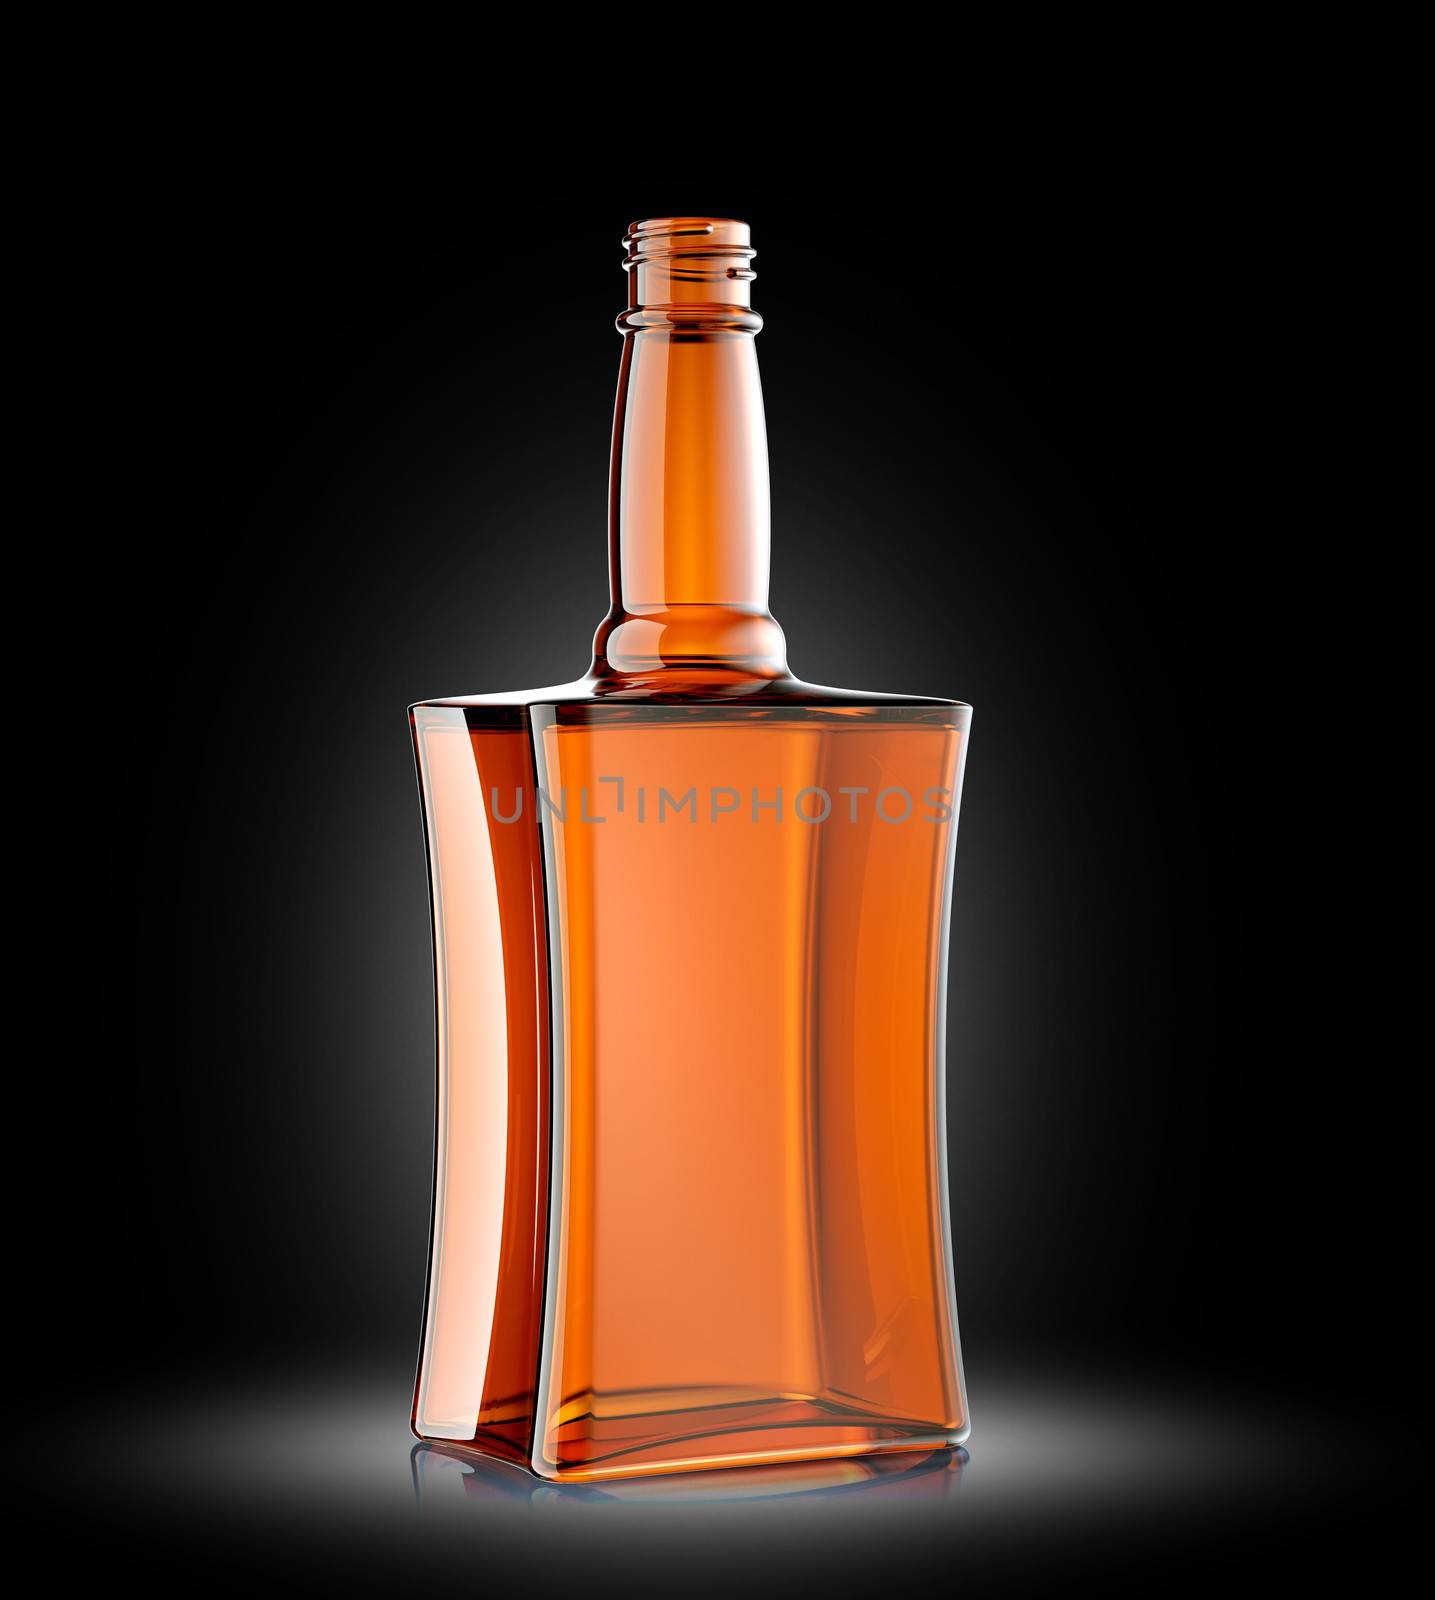 Red glass bottle for cognac or whisky on black background